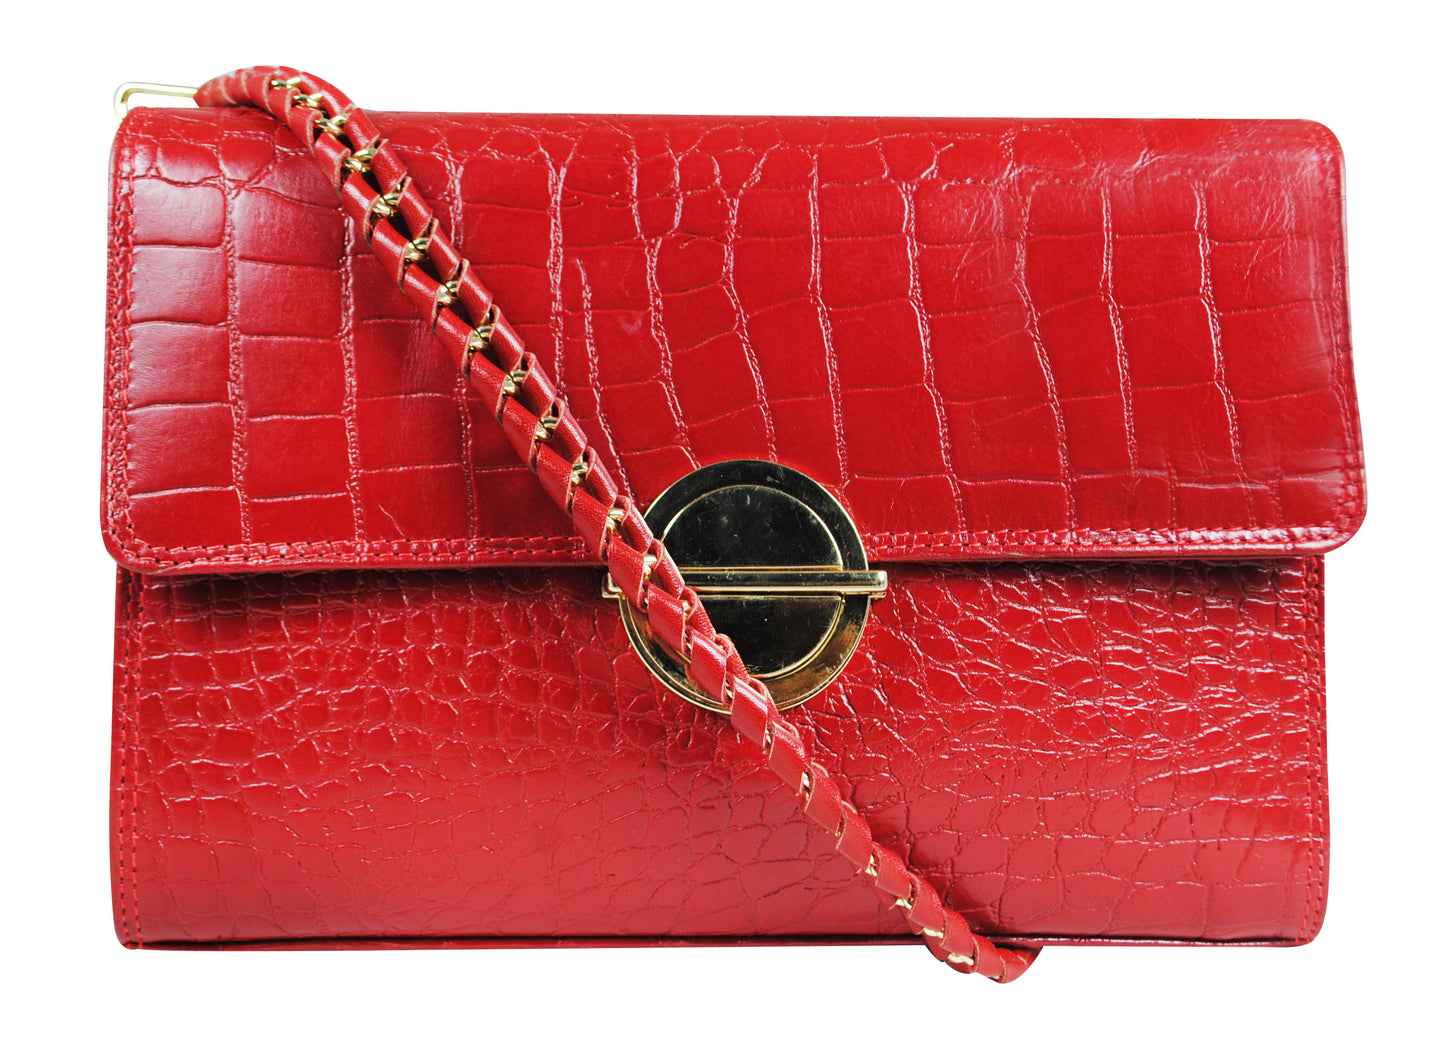 Calfnero Genuine Leather Women's Sling Bag (102-Red-Coco)